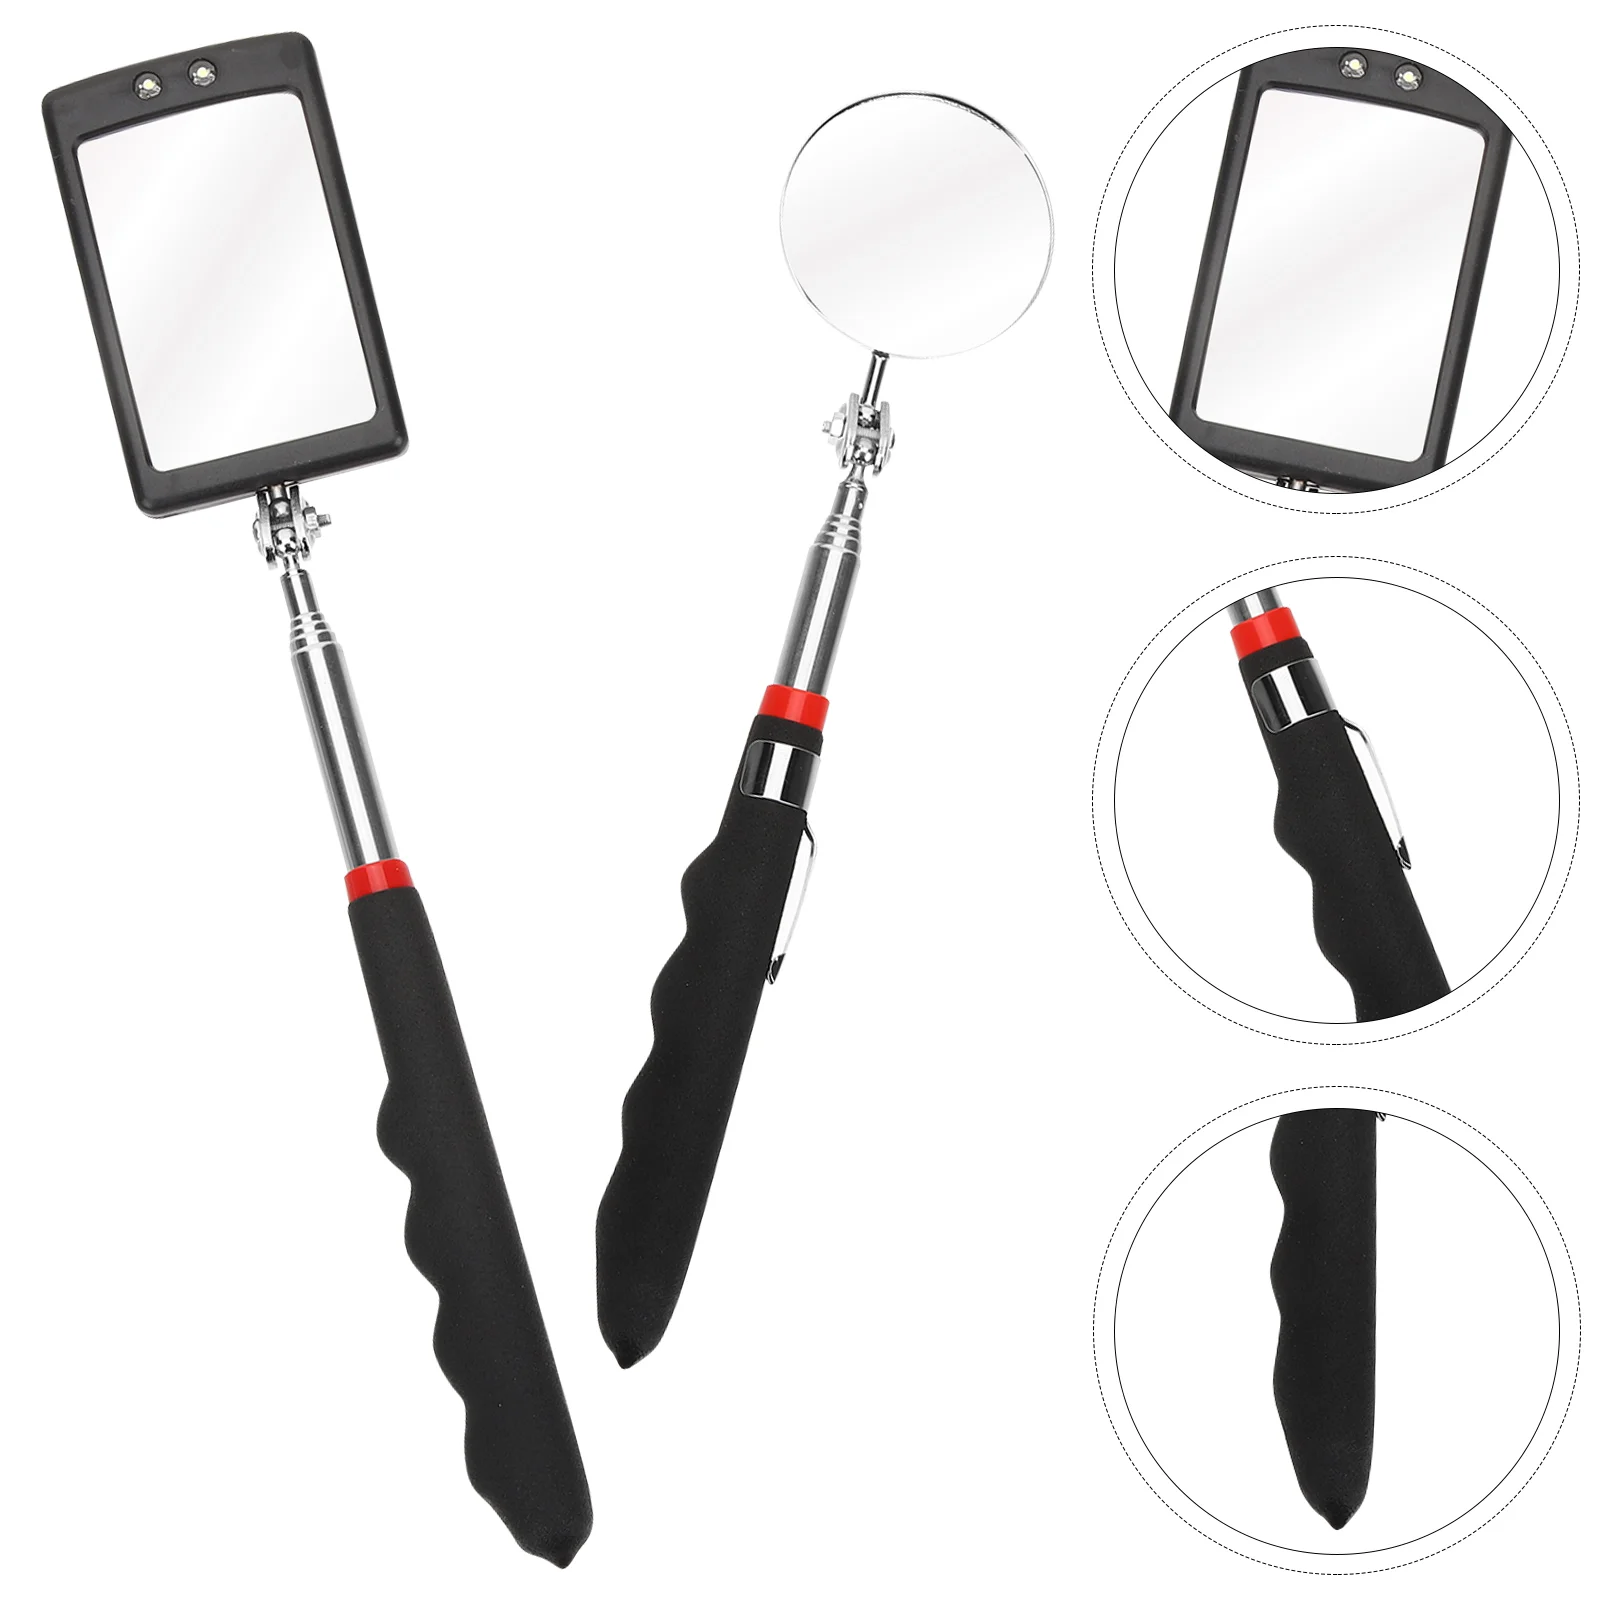 

Mirror Inspection Telescoping Telescopic Pick Up Stick Flexible Extending Rod Adjustable Tool Mechanic Led Lighted Claws Grabber